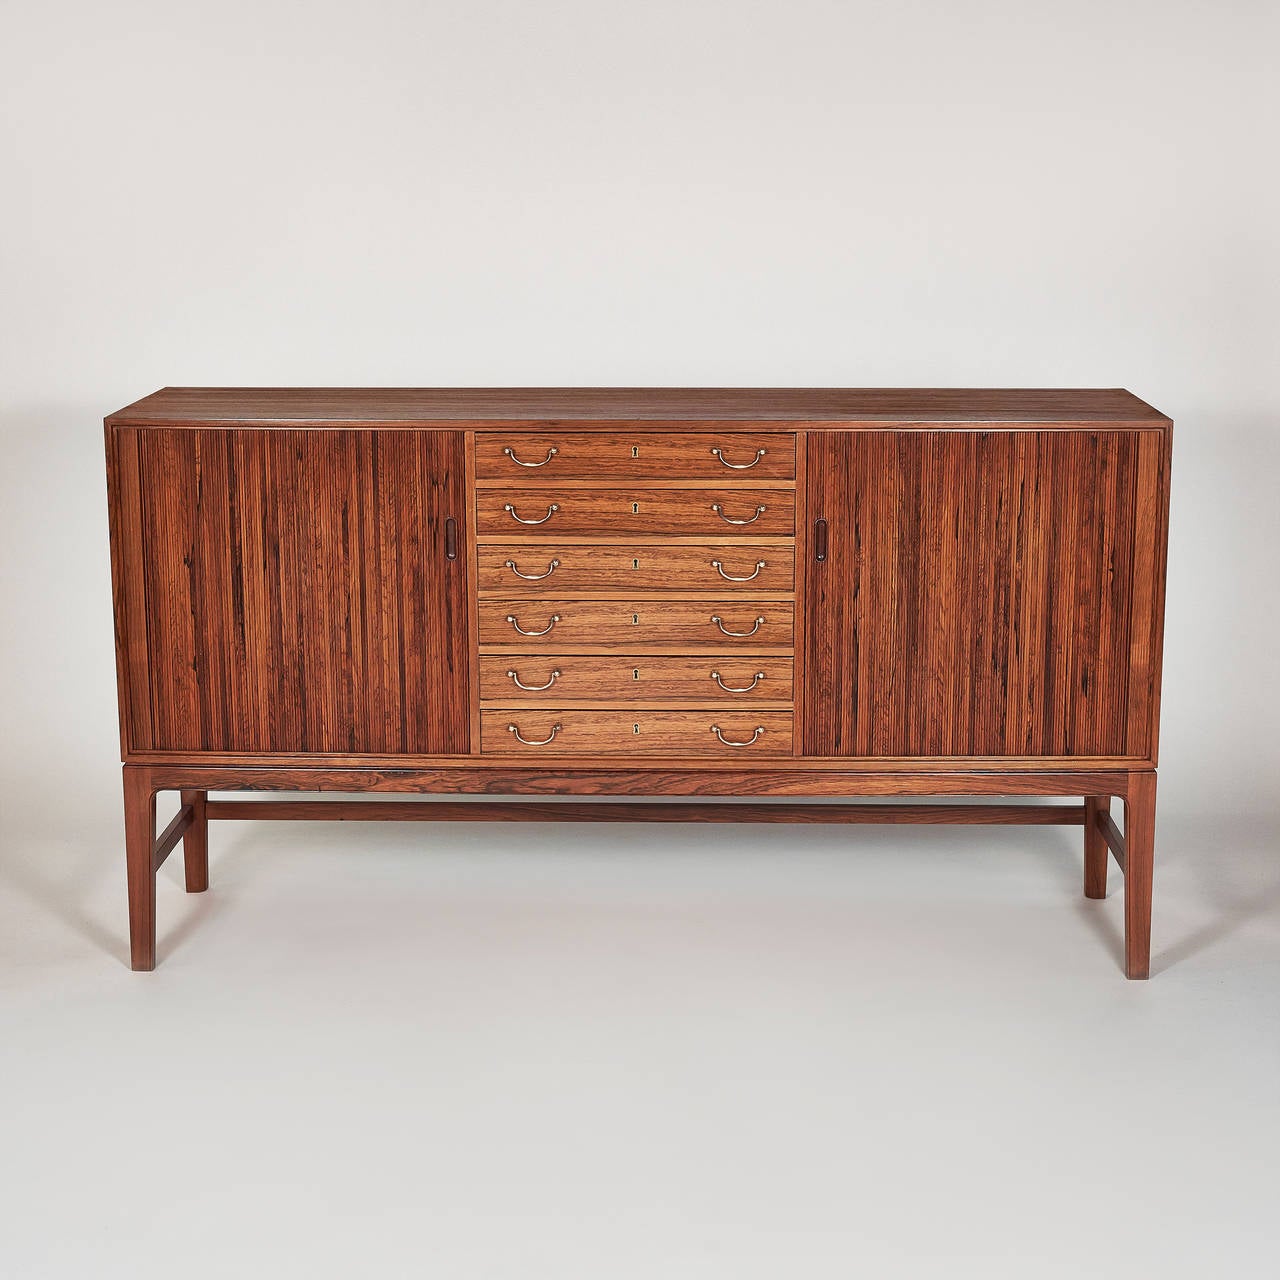 This beautiful tambour cabinet was designed by Ole Wanscher for A.J. Iversen Snedkermester. It is made from rosewood and features two tambour doors with brass fittings. The interior has three adjustable shelves and six drawers. The tambour door